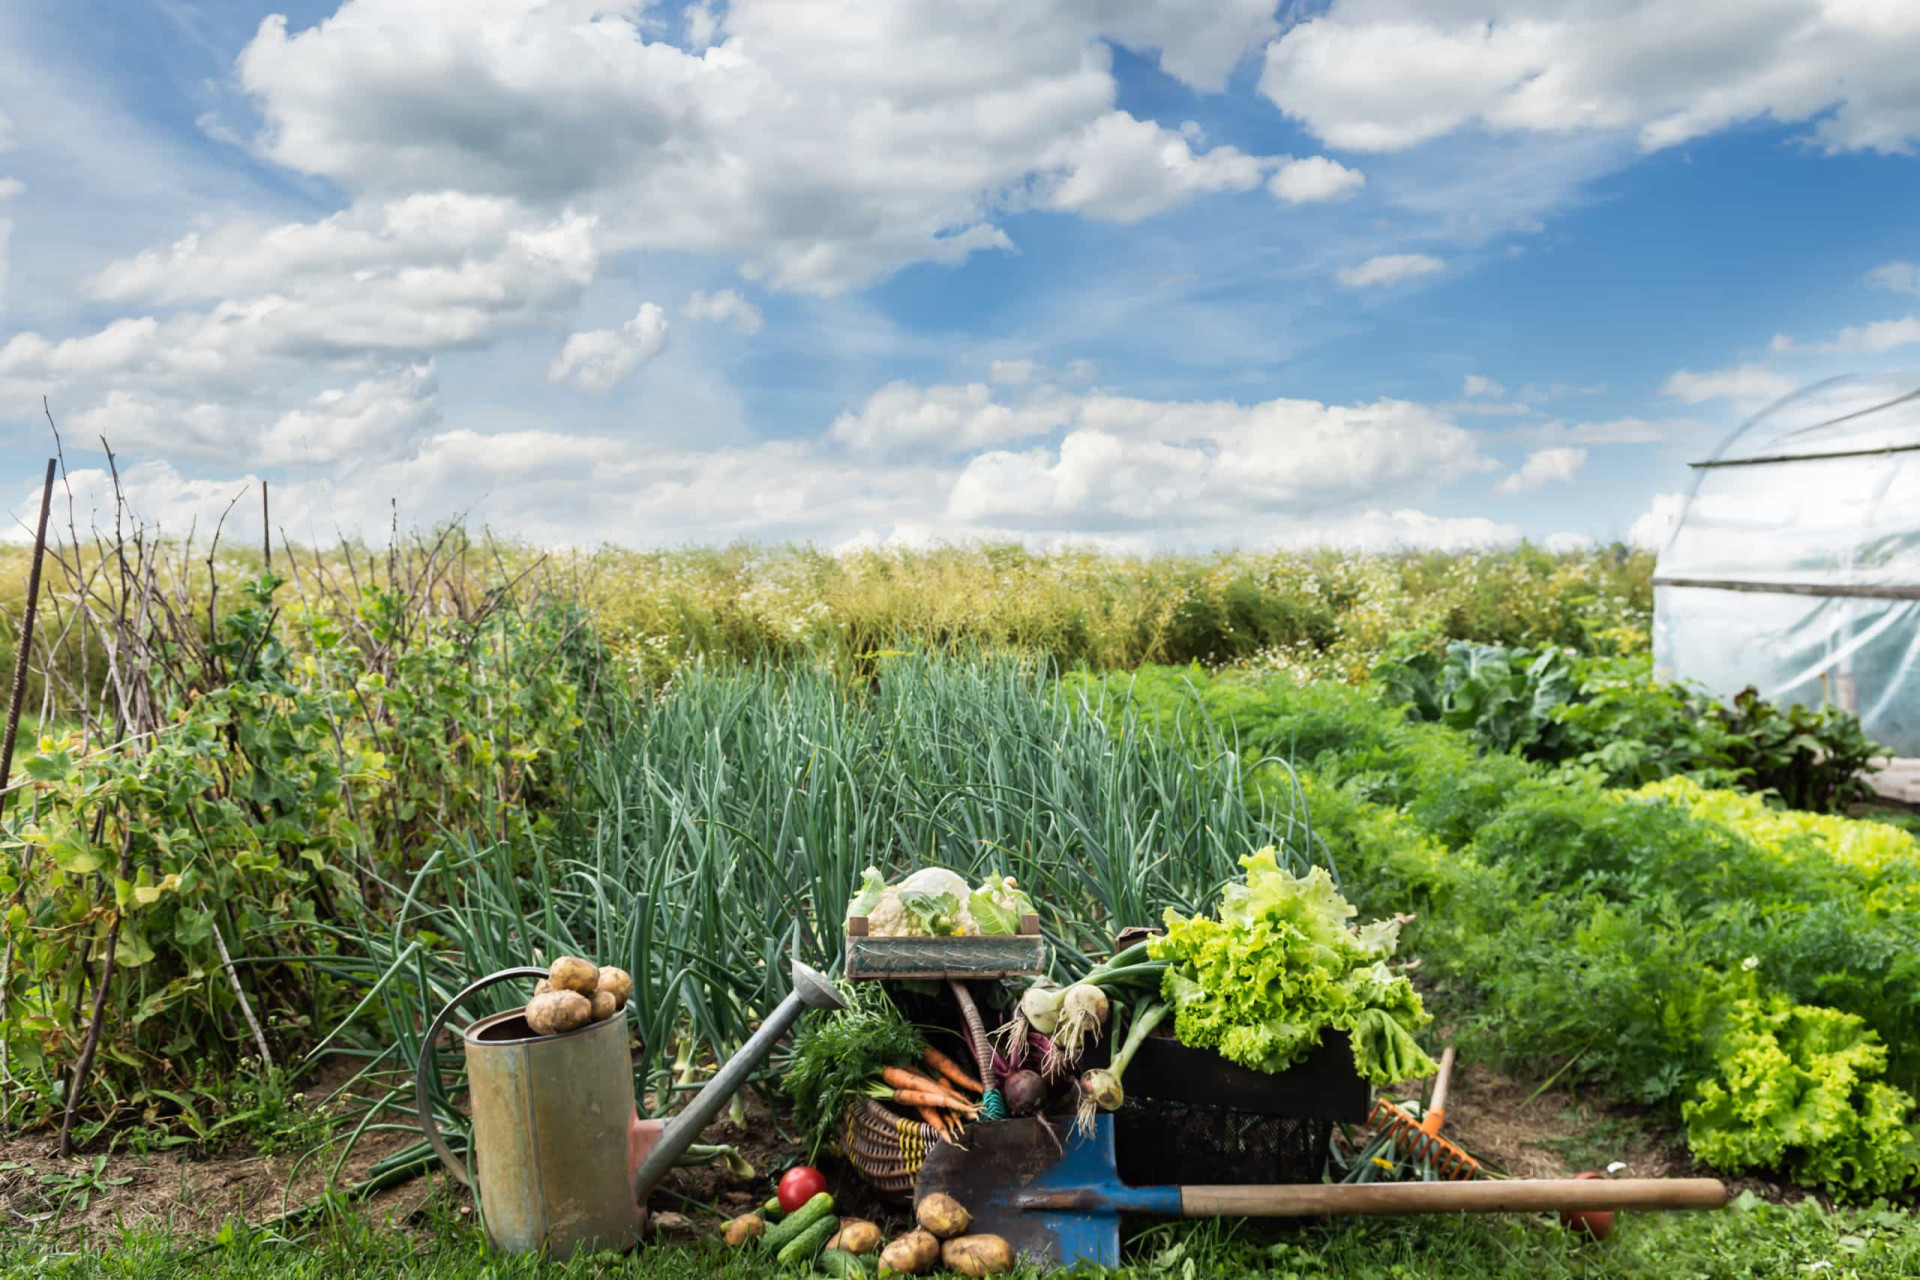 <p>One common mistake is putting a new vegetable garden in the wrong spot on your property. Keep in mind how far your vegetable plot is from your home and how close it is to other garden elements such as a rainwater harvesting system and your composting system.</p><p>You may also like:<a href="https://www.starsinsider.com/n/444762?utm_source=msn.com&utm_medium=display&utm_campaign=referral_description&utm_content=491515en-us"> Multiracial bands that made history</a></p>